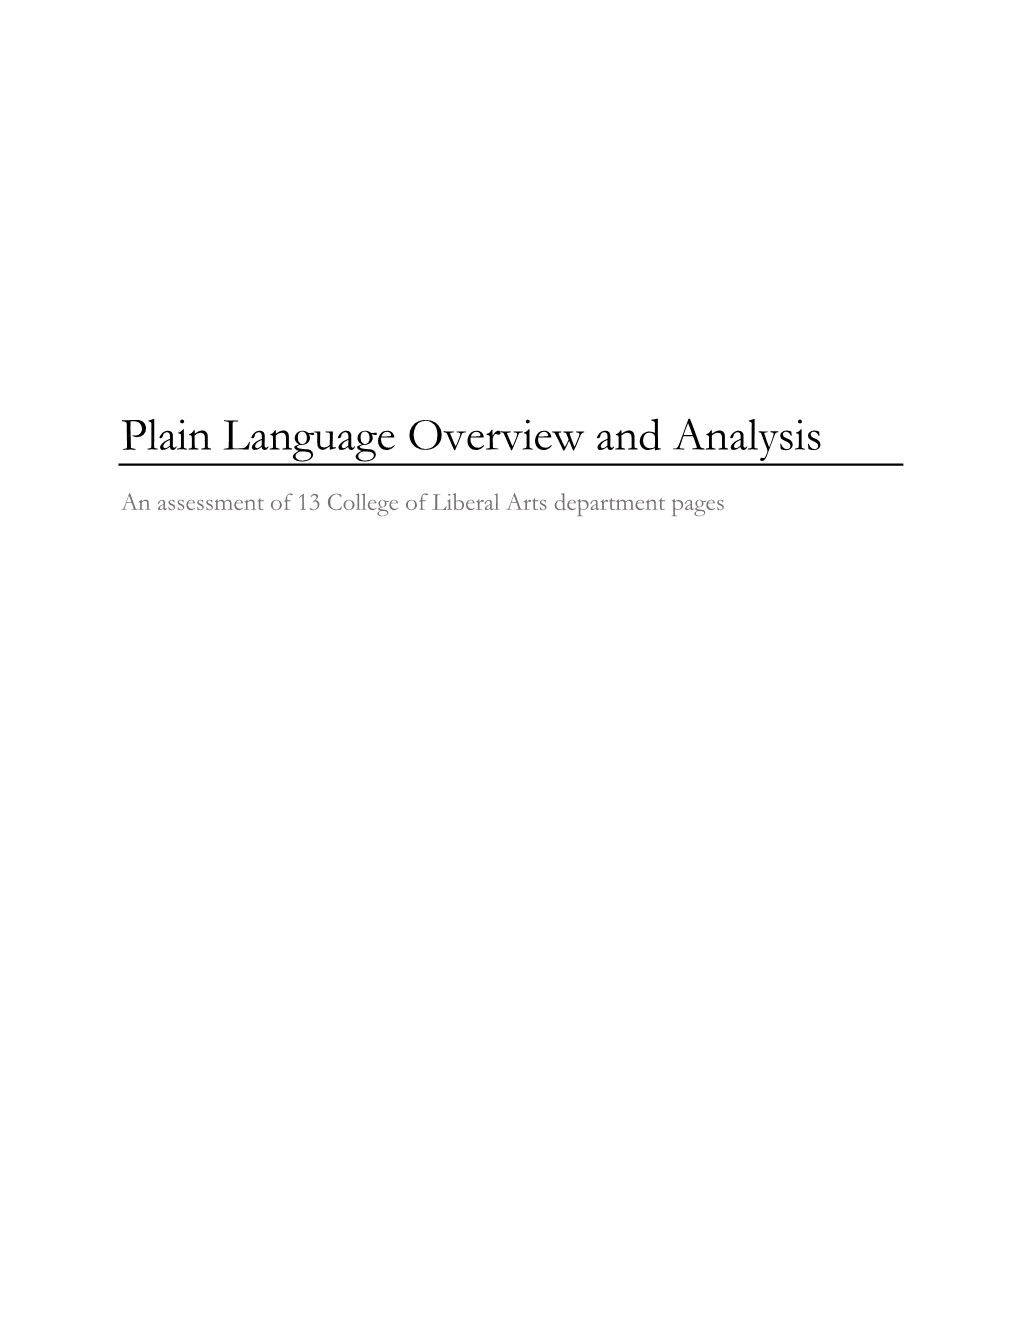 Plain Language Overview and Analysis